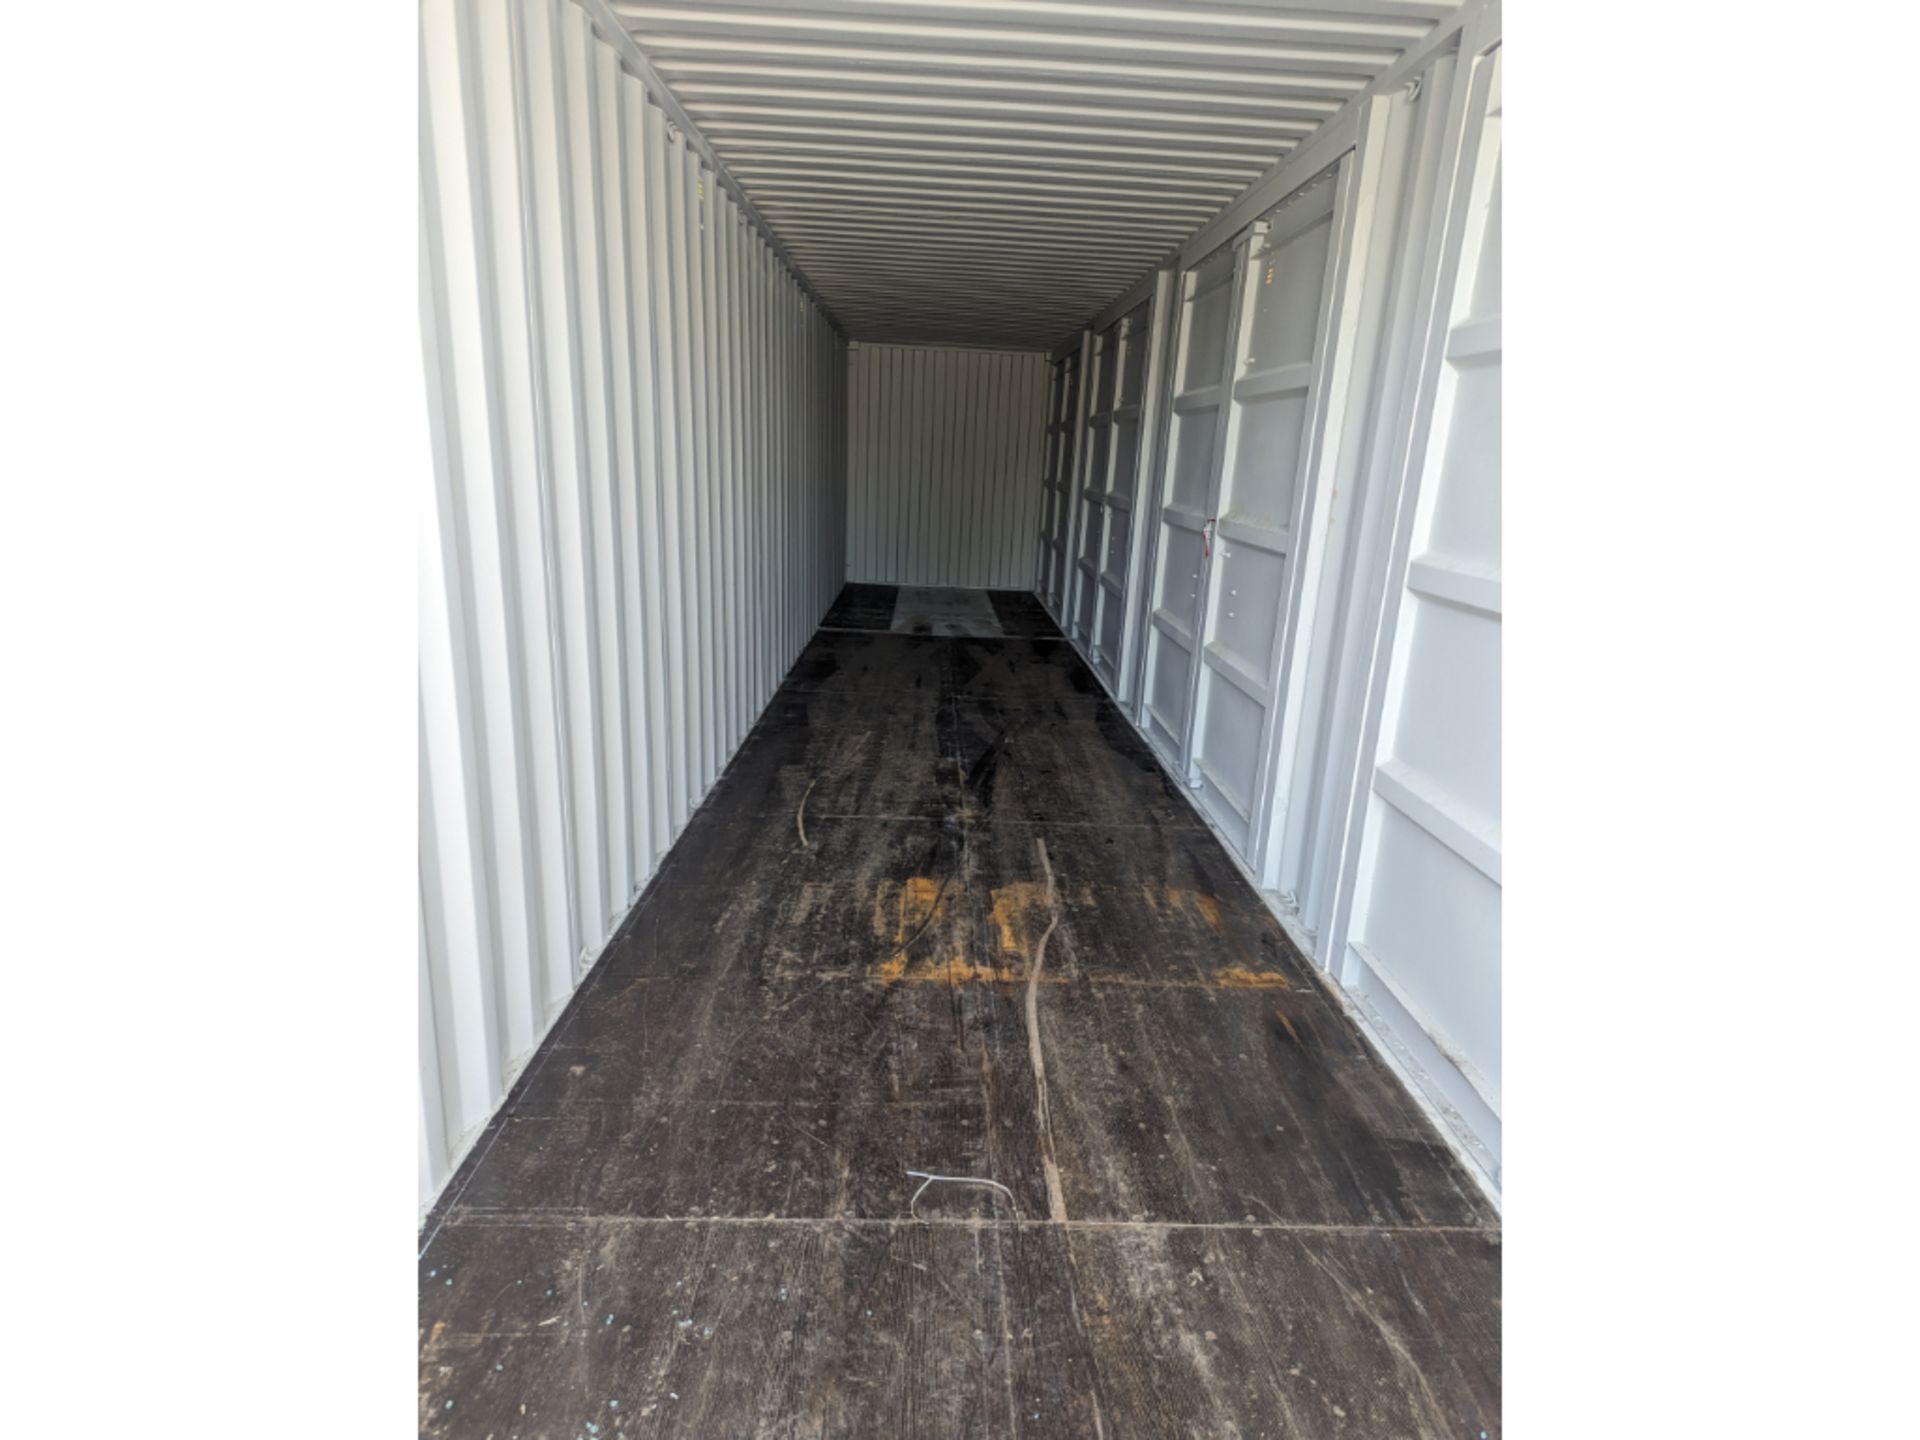 1 Trip 40' High Side Shipping Container w/ Side Doors - Image 3 of 4